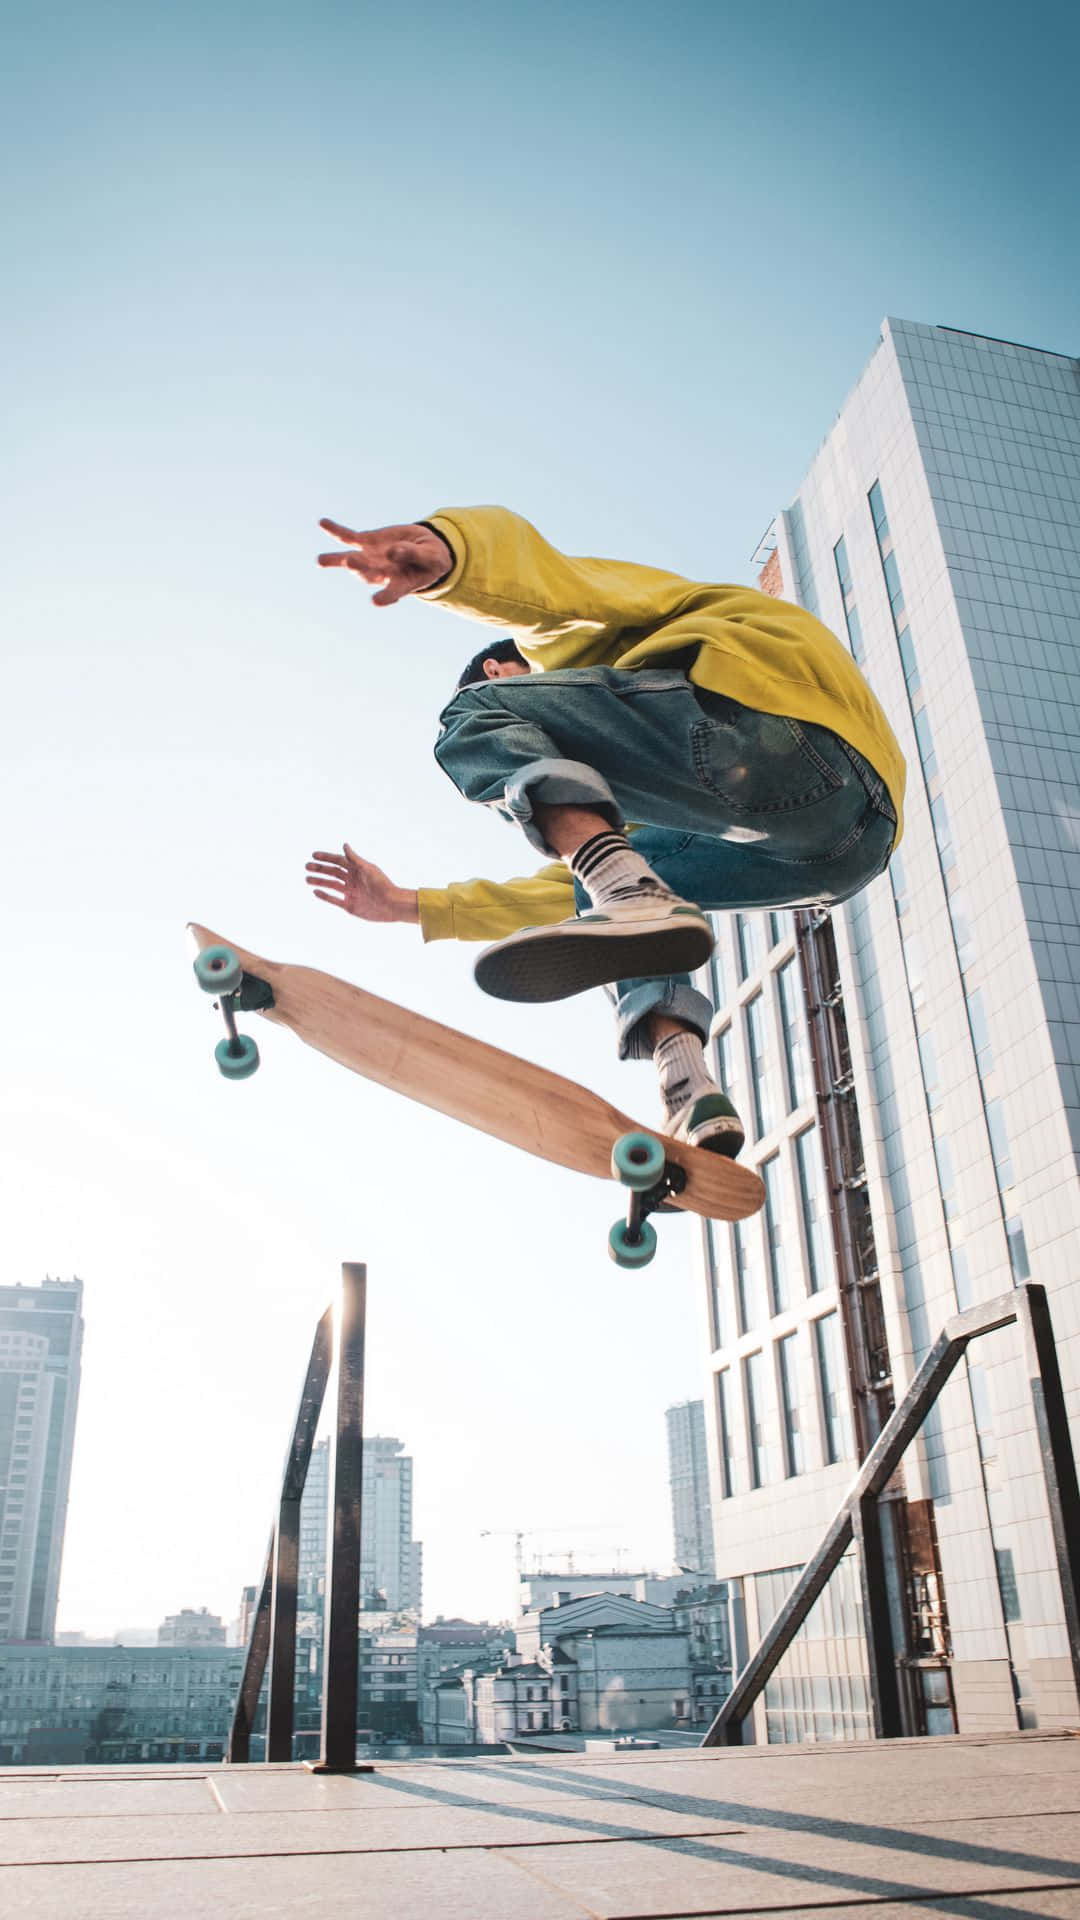 A Skateboarder Doing Tricks In The Air Wallpaper